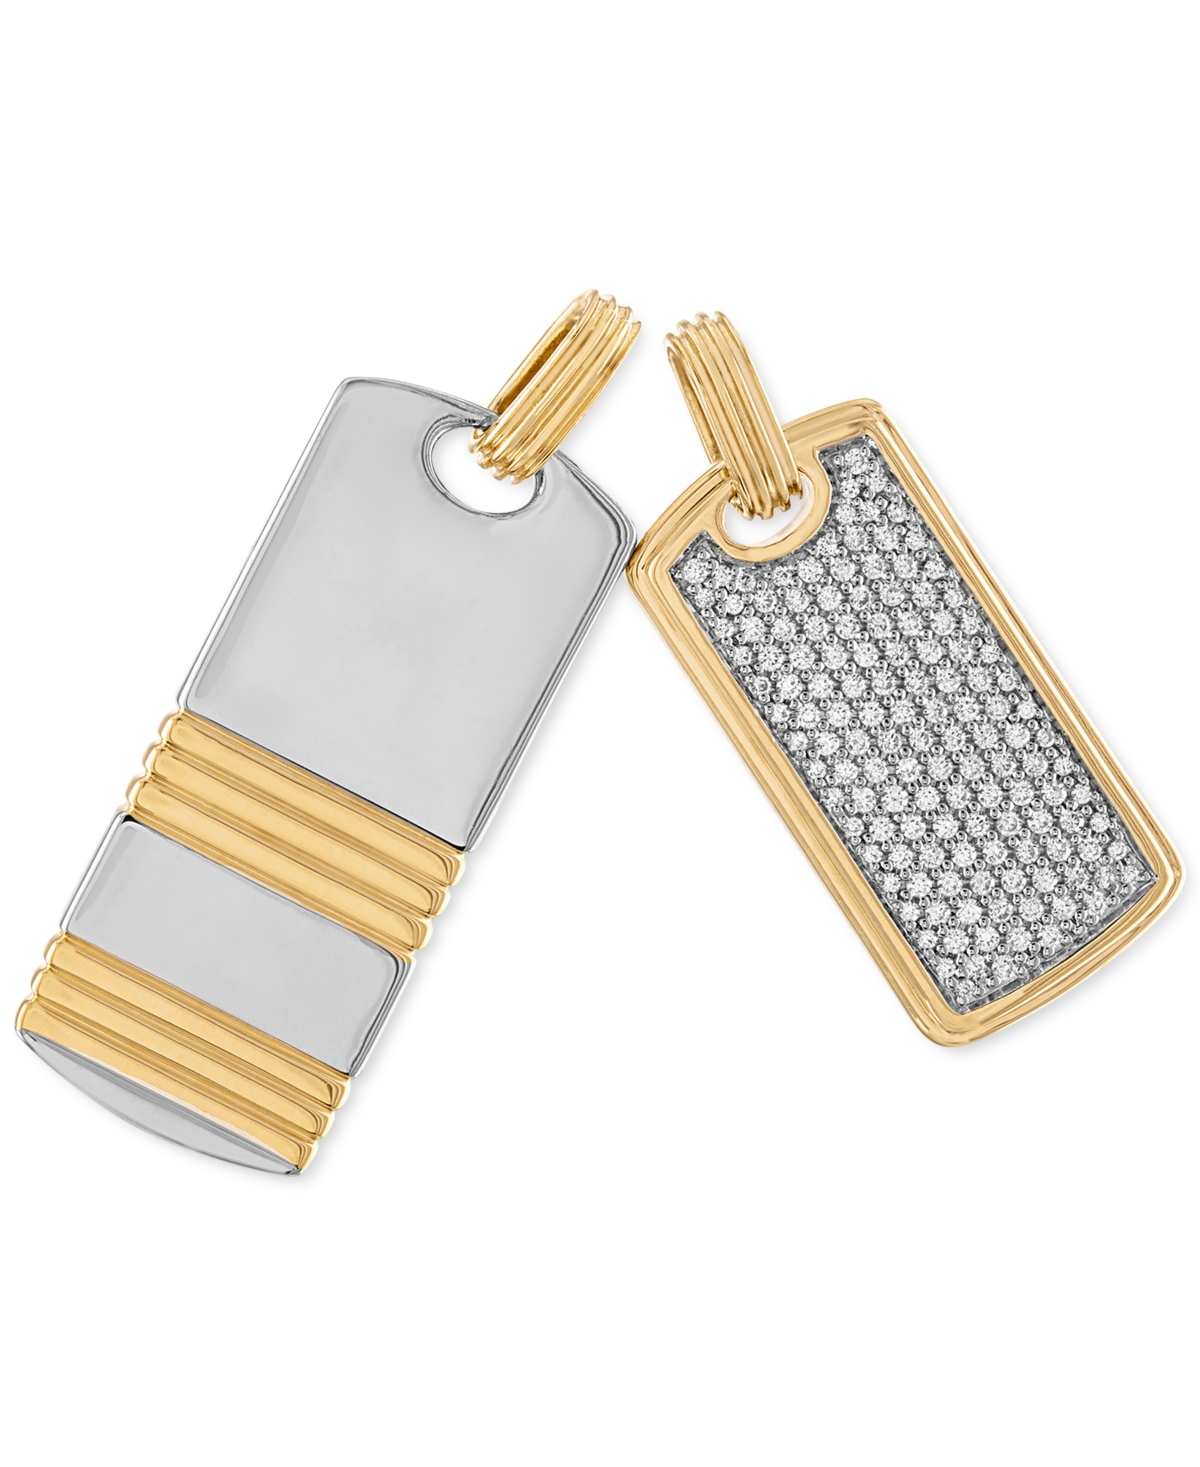 2-Pc. Set Cubic Zirconia Pave & Ridged Dog Tag Pendants in Sterling Silver & 14k Gold-Plate, Created for Macy's - Gold Over Silv